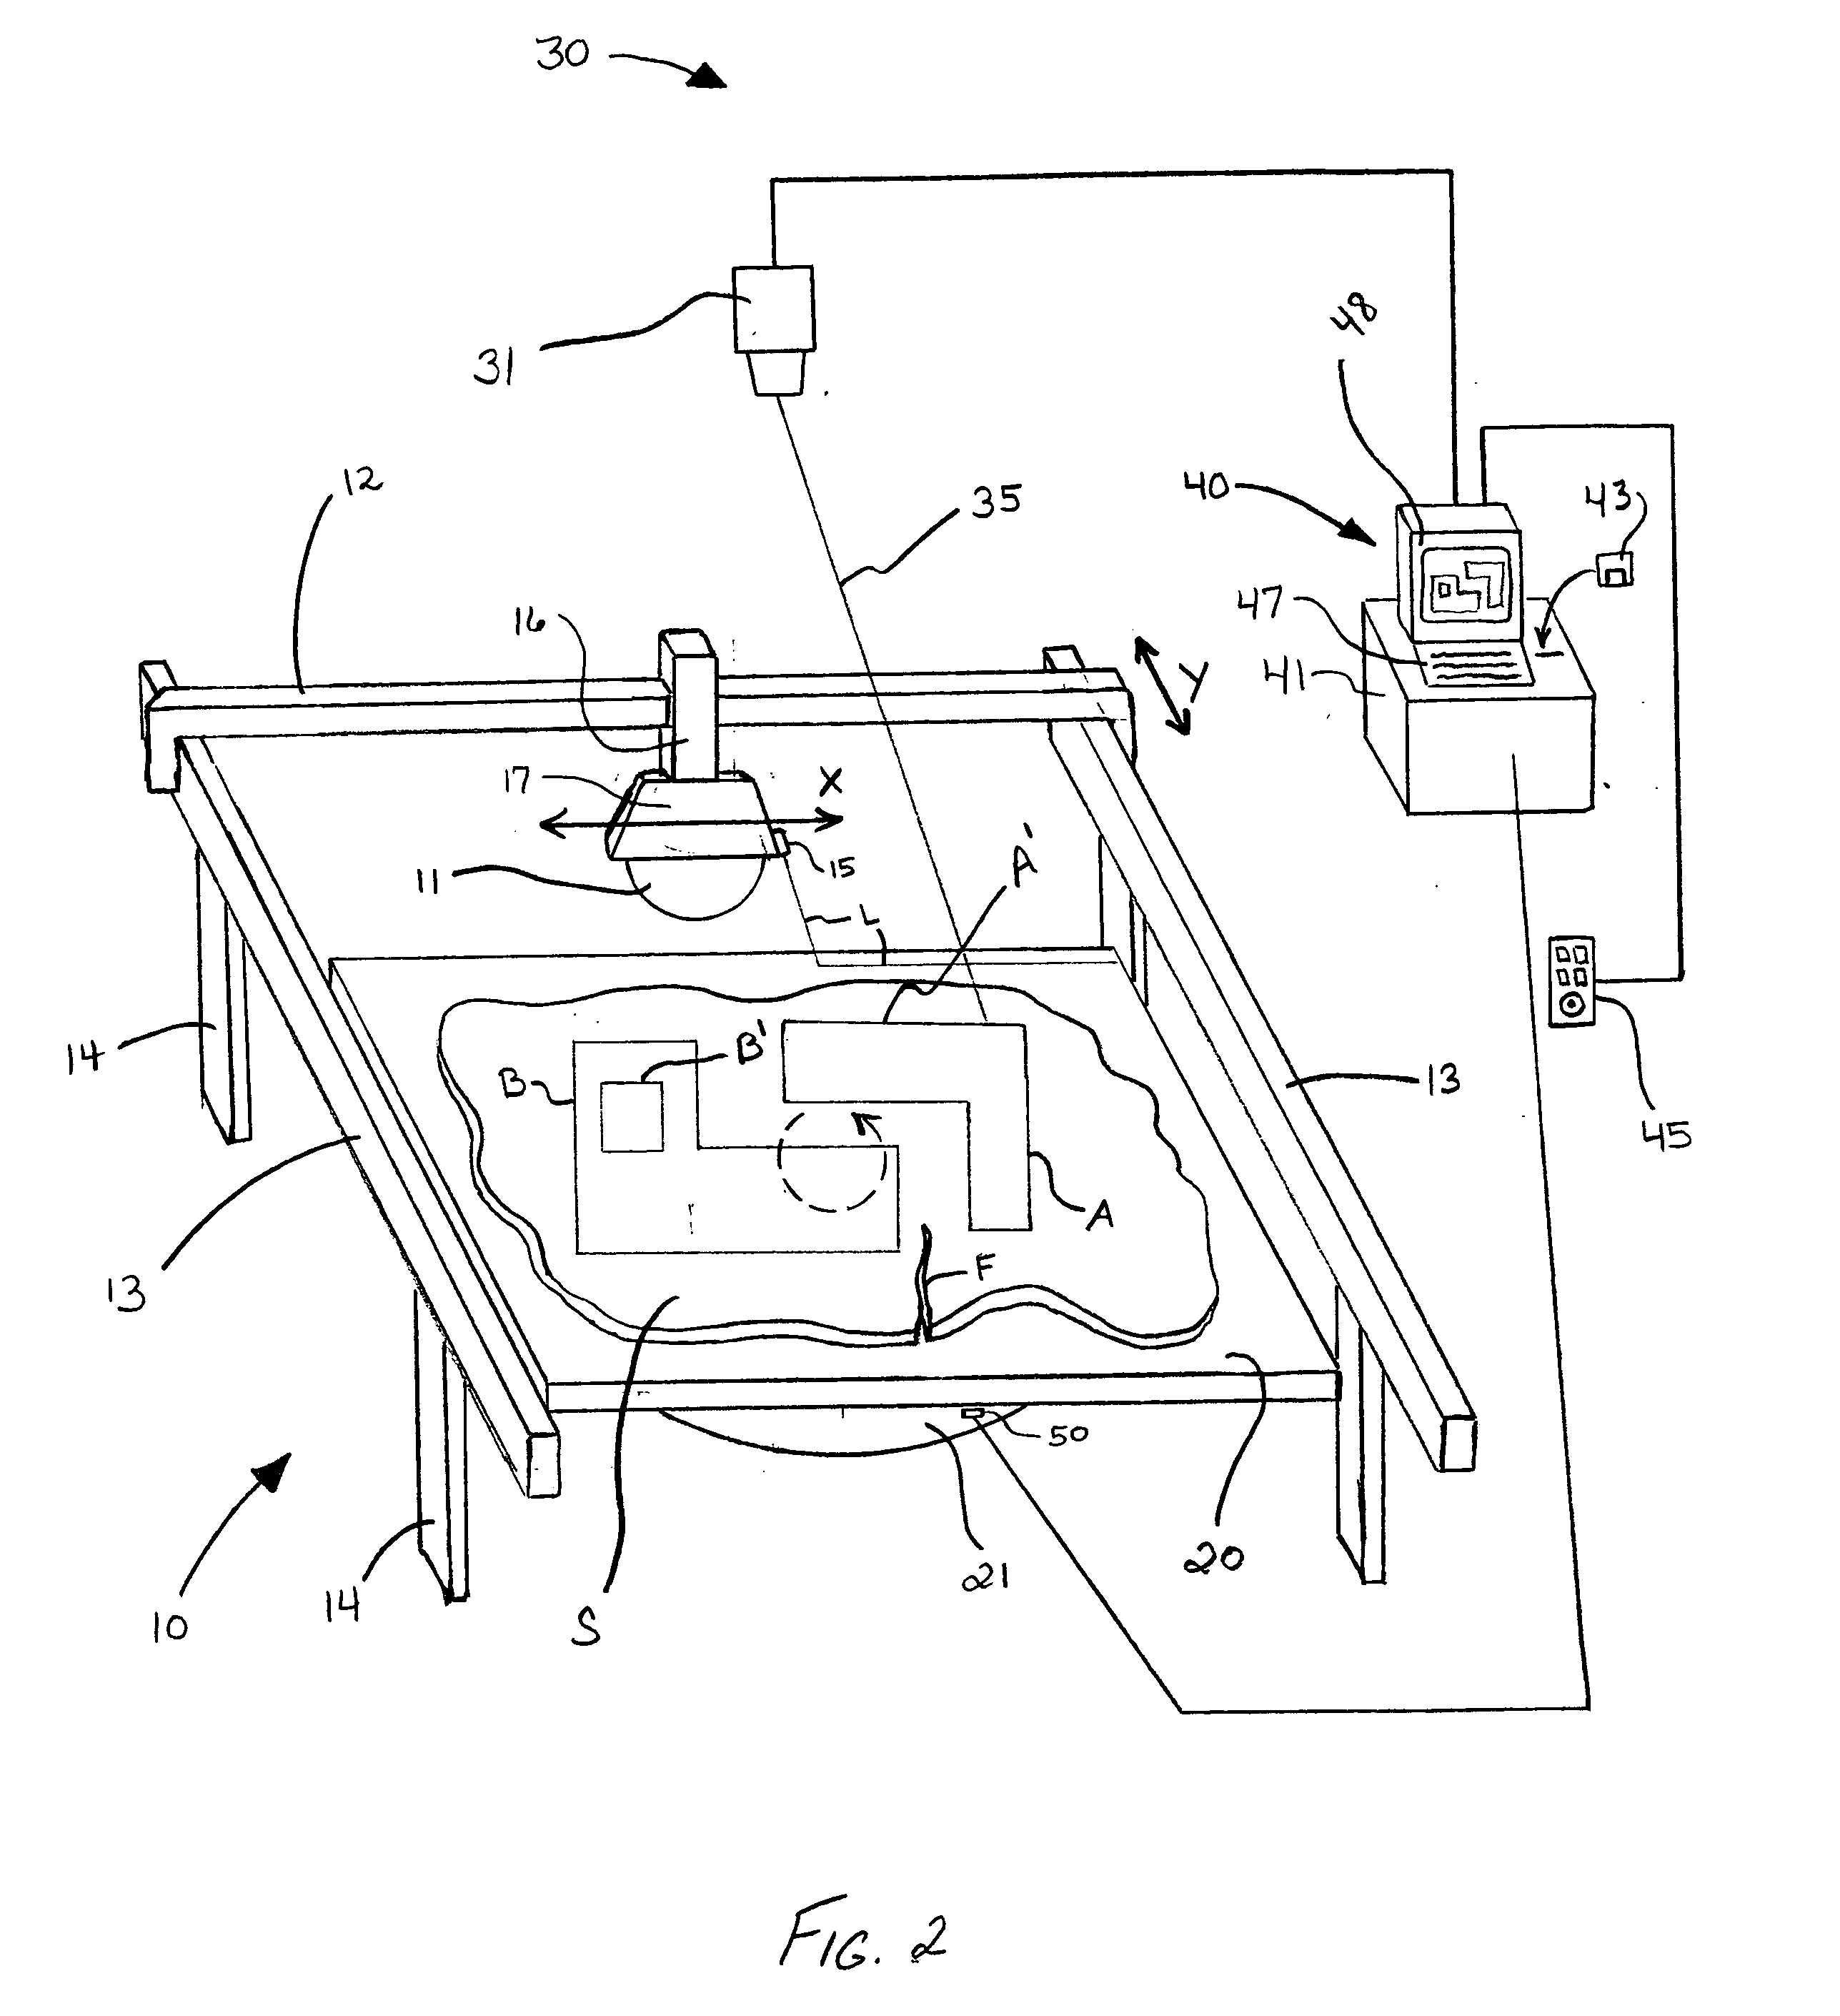 Systems and methods for displaying images and processing work pieces